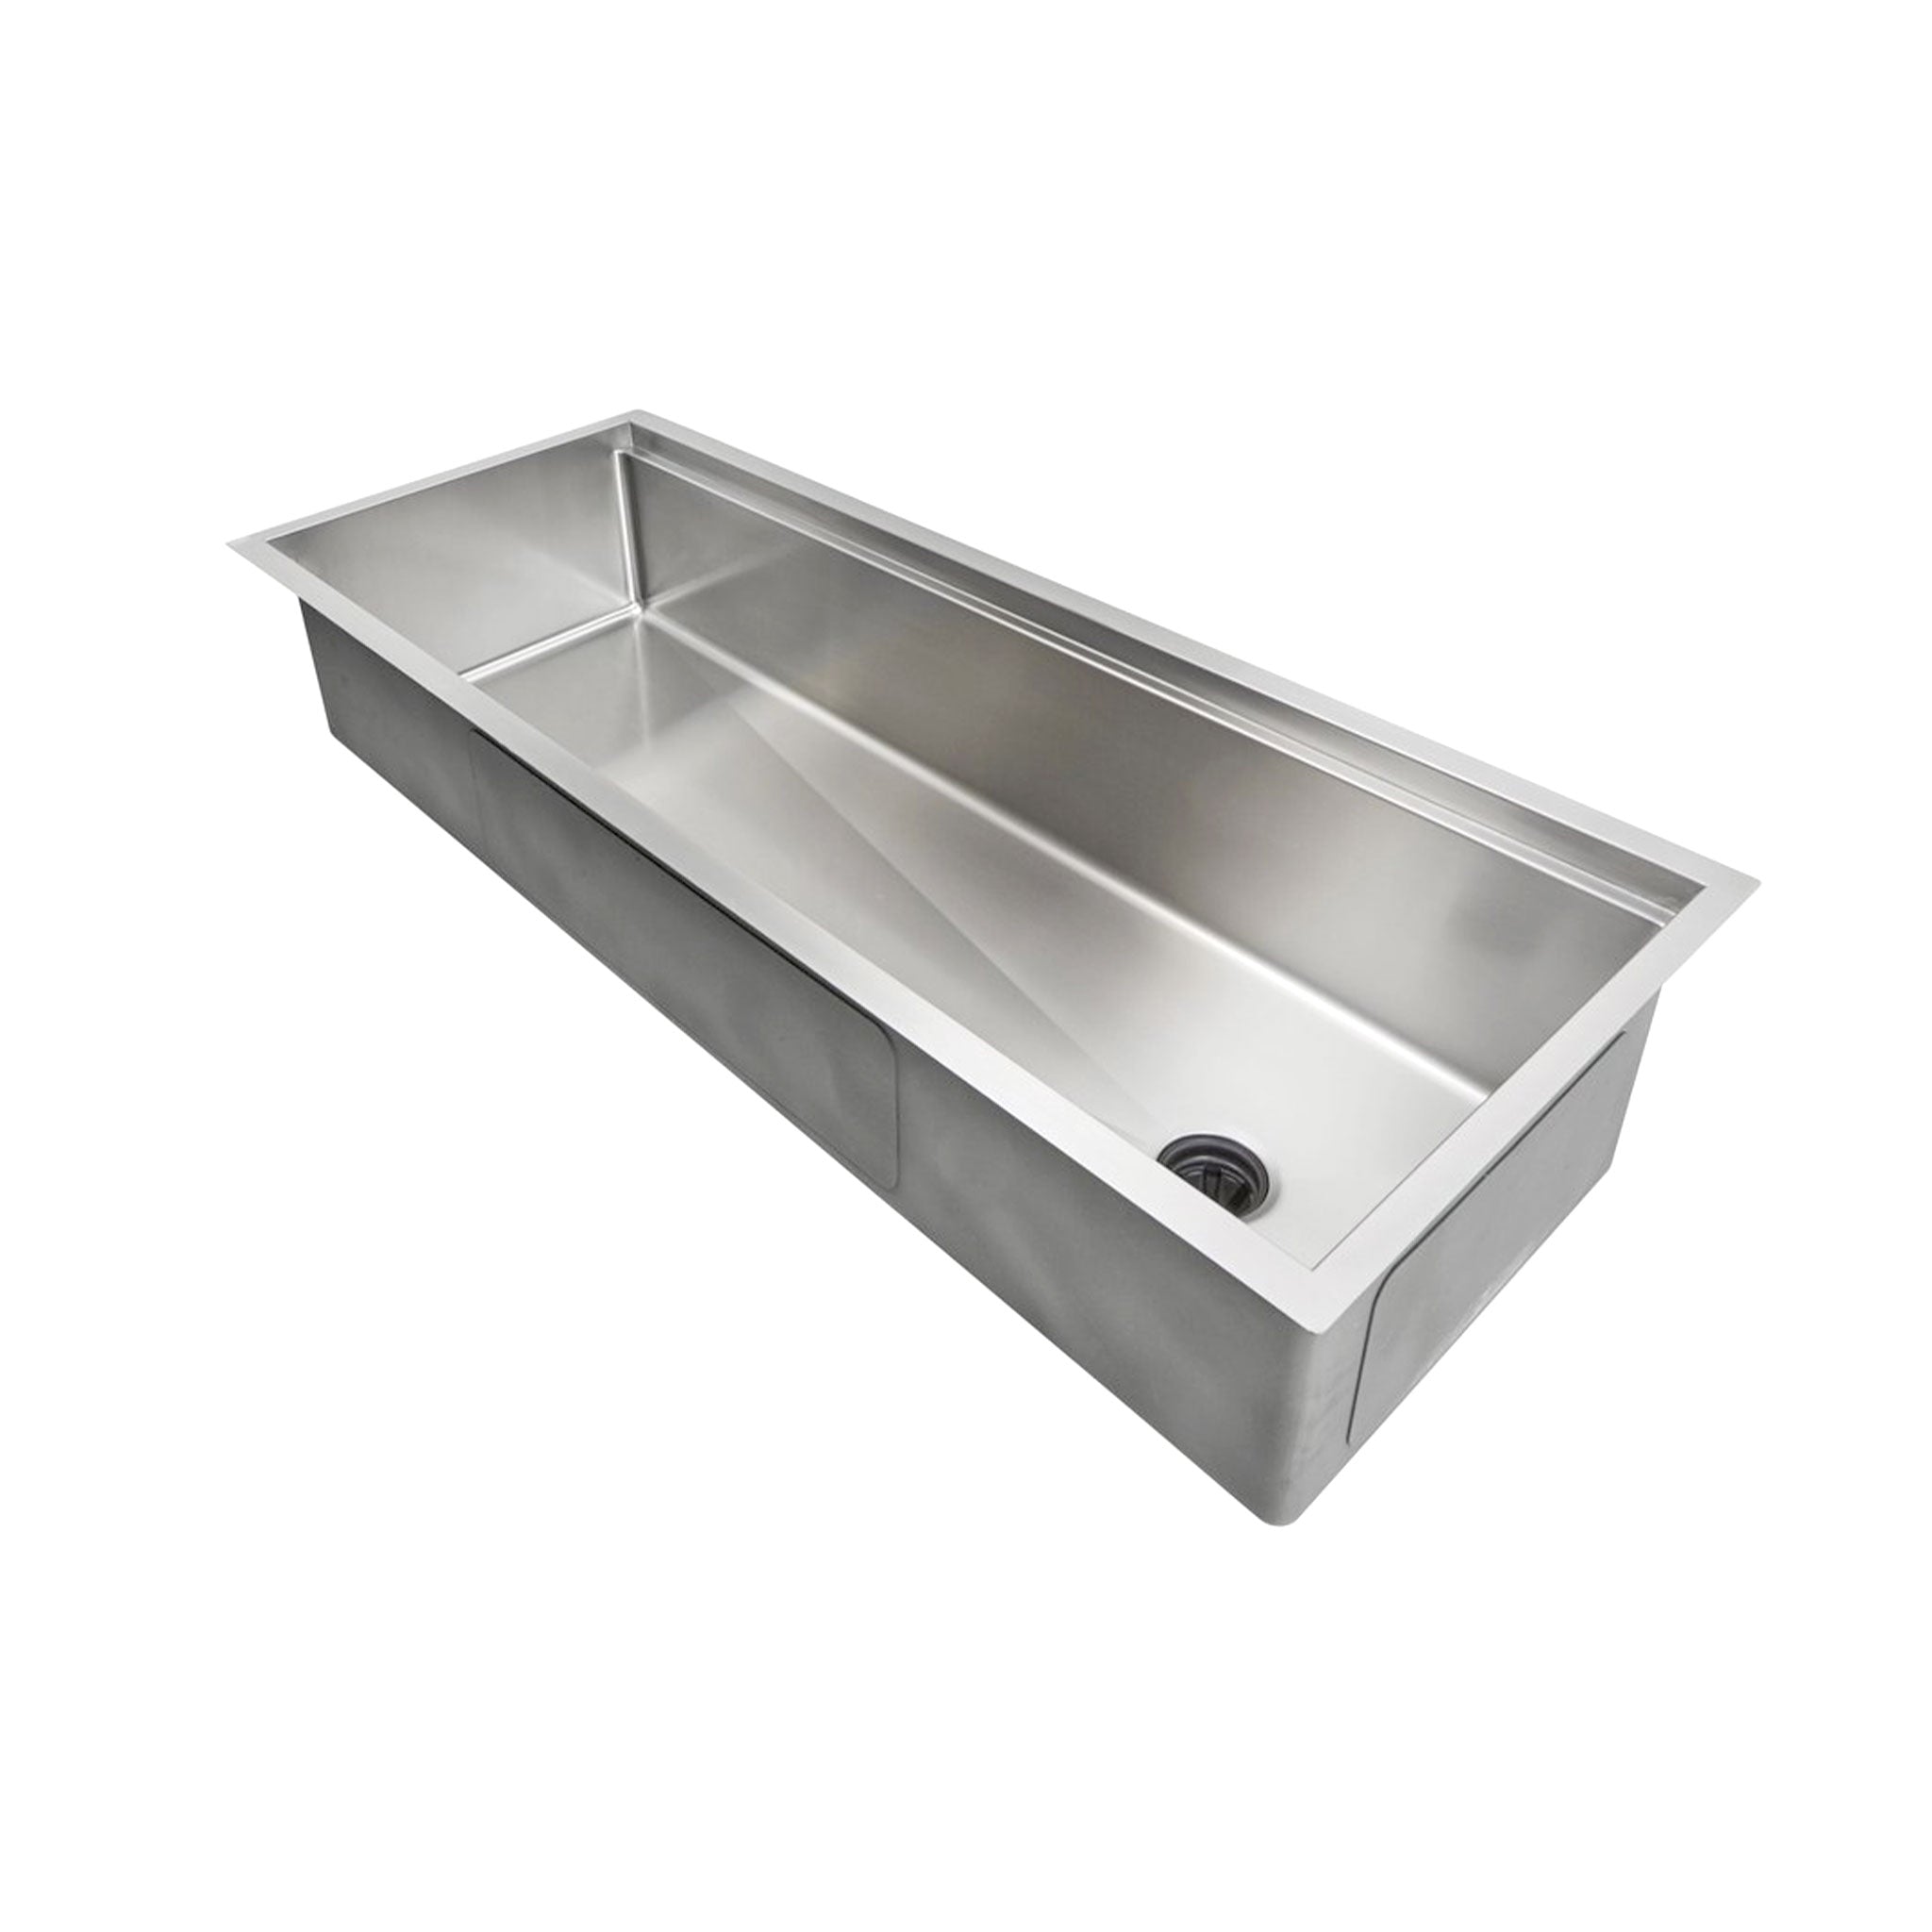 large 46 inch undermount stainless steel workstation sink with nne big basin sink with offset centered drain.